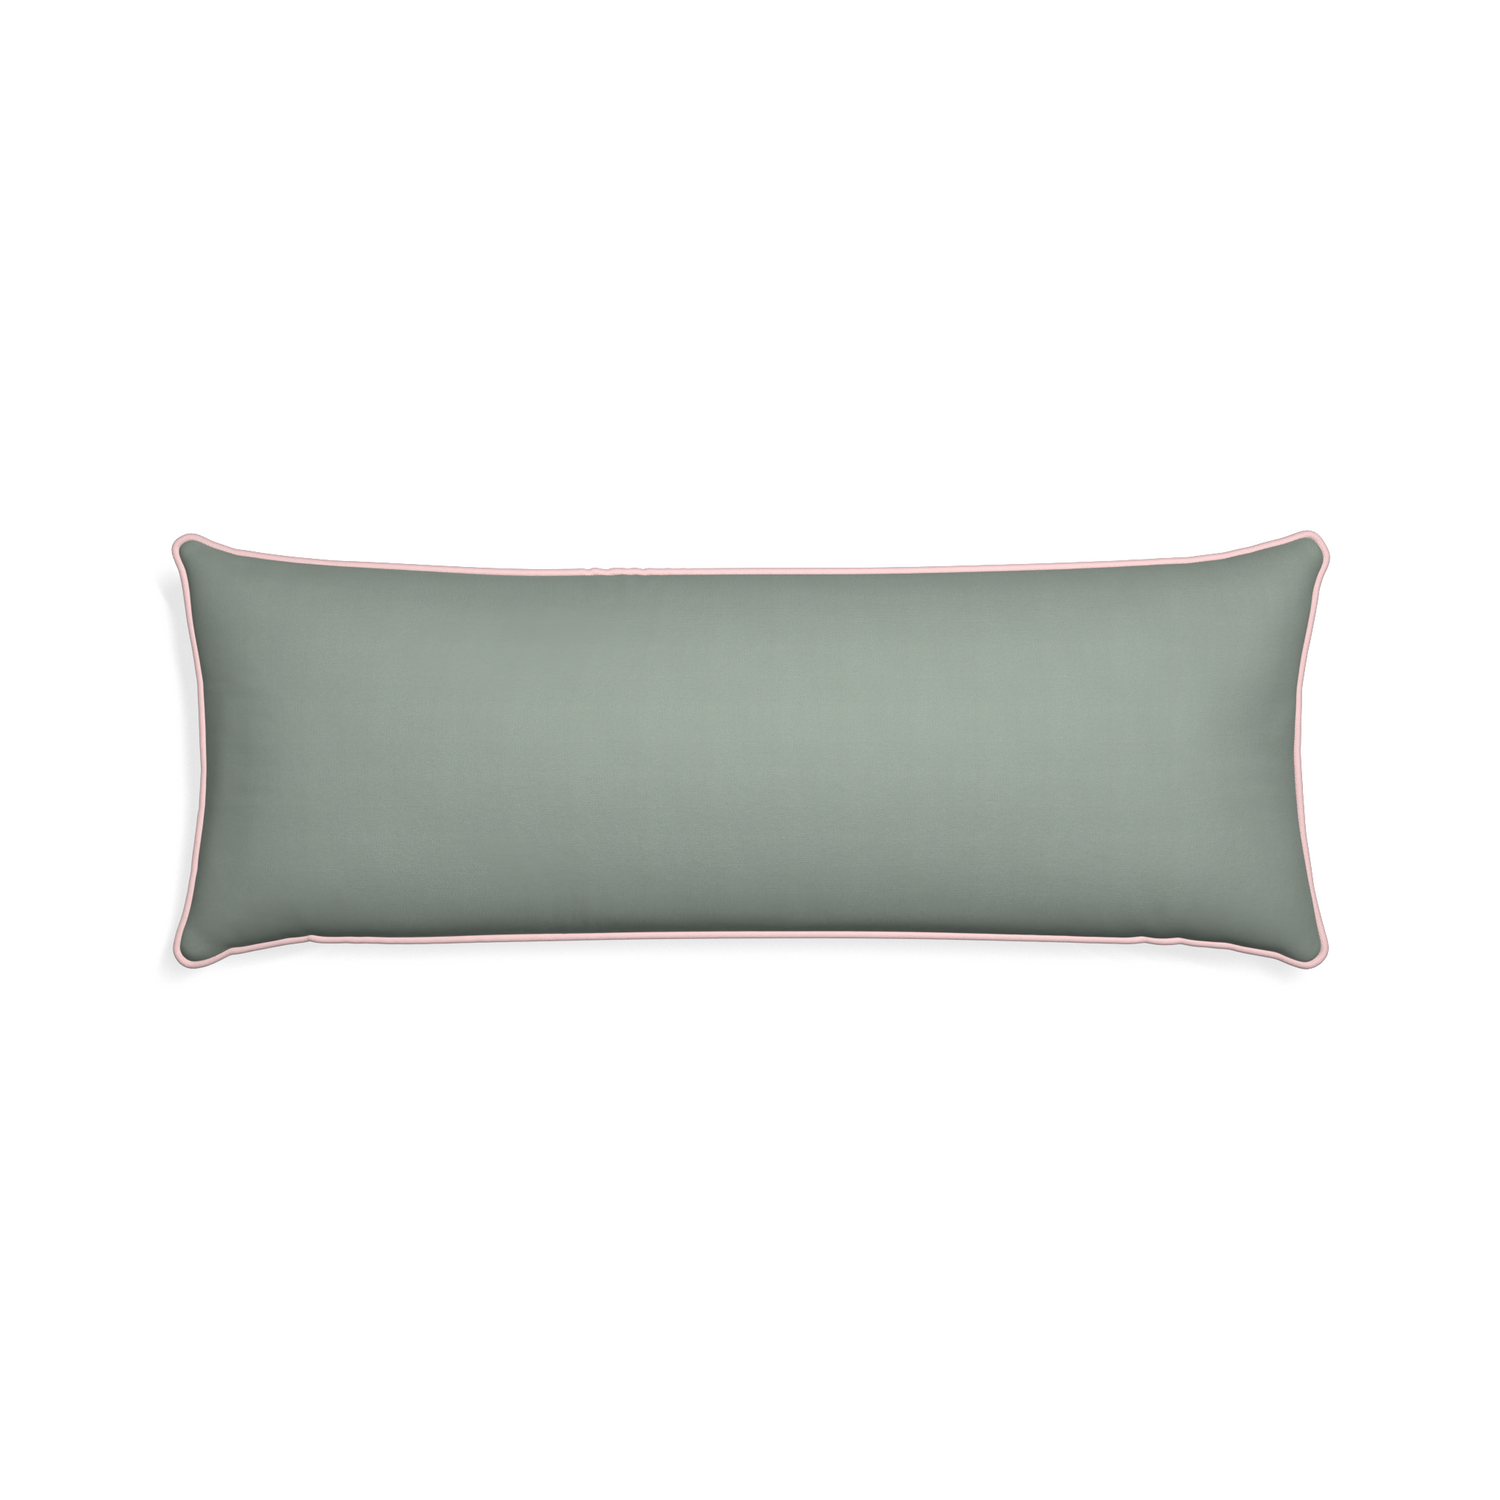 Xl-lumbar sage custom pillow with petal piping on white background